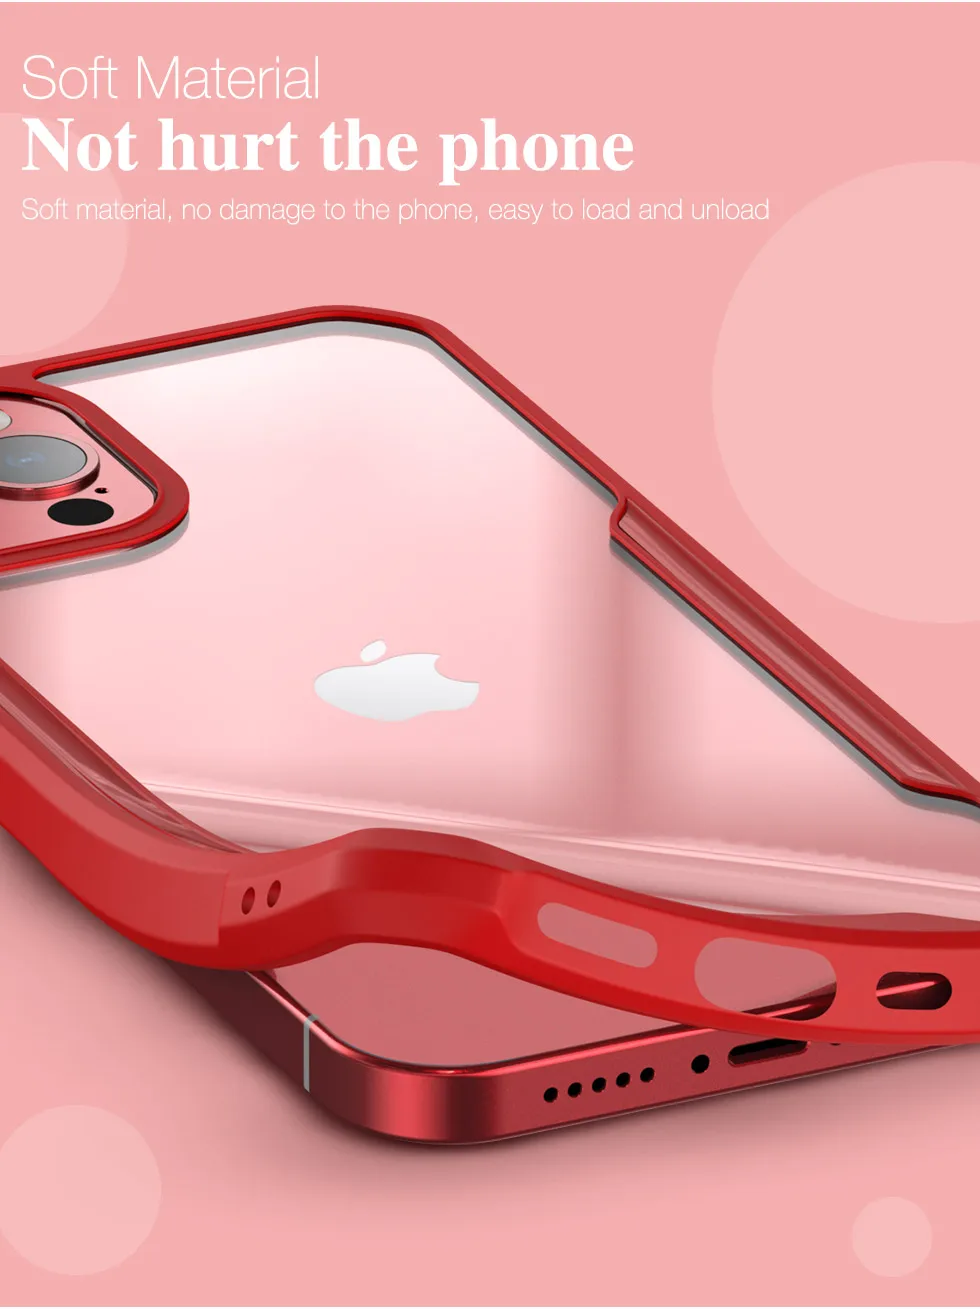 Luxury Shockproof Armor Case For iPhone 12 11 Pro XS Max X XR 6 6S 7 8 Plus Mobile Phone Cover Back Clear Shell Soft Bumper Hull iphone 8 silicone case